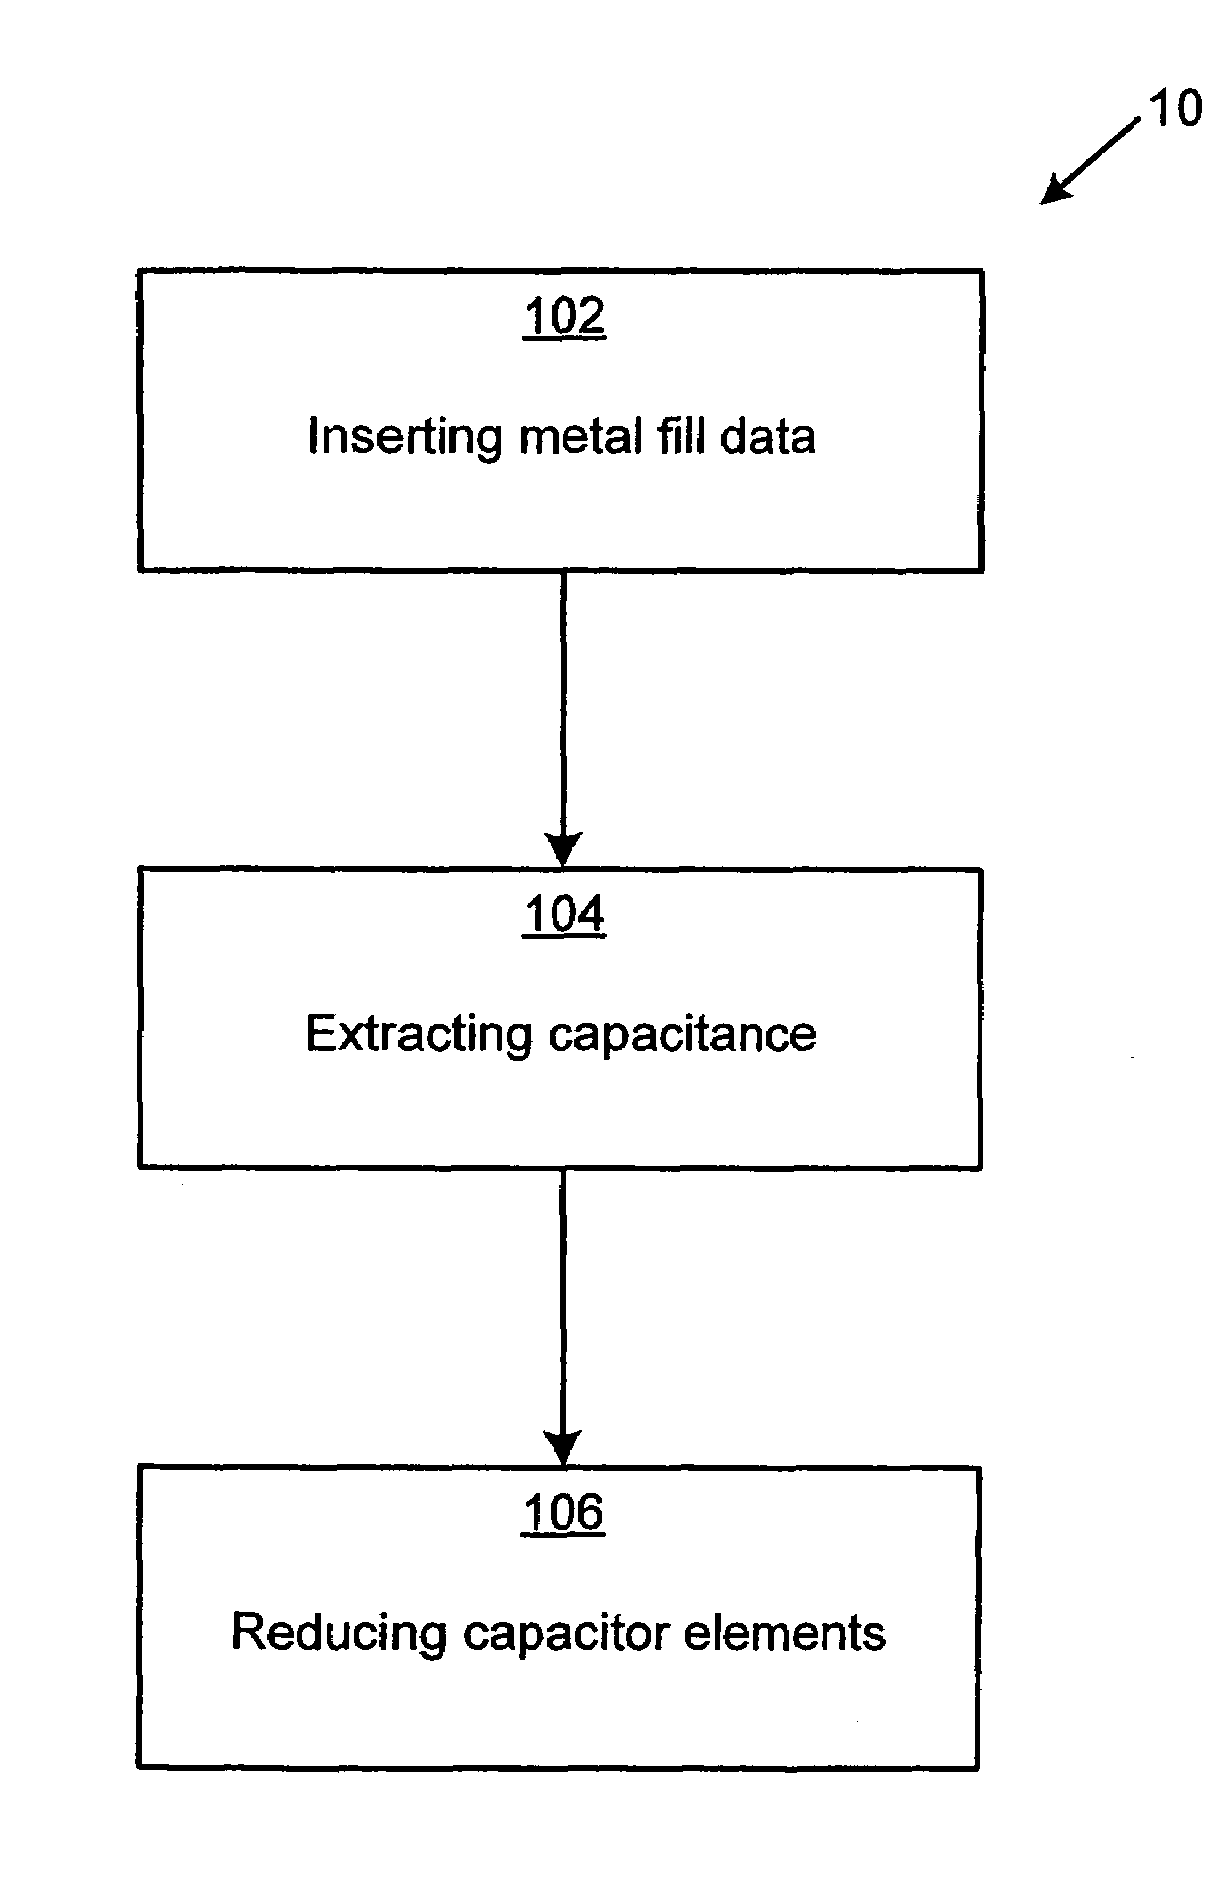 Methods and mechanisms for implementing virtual metal fill